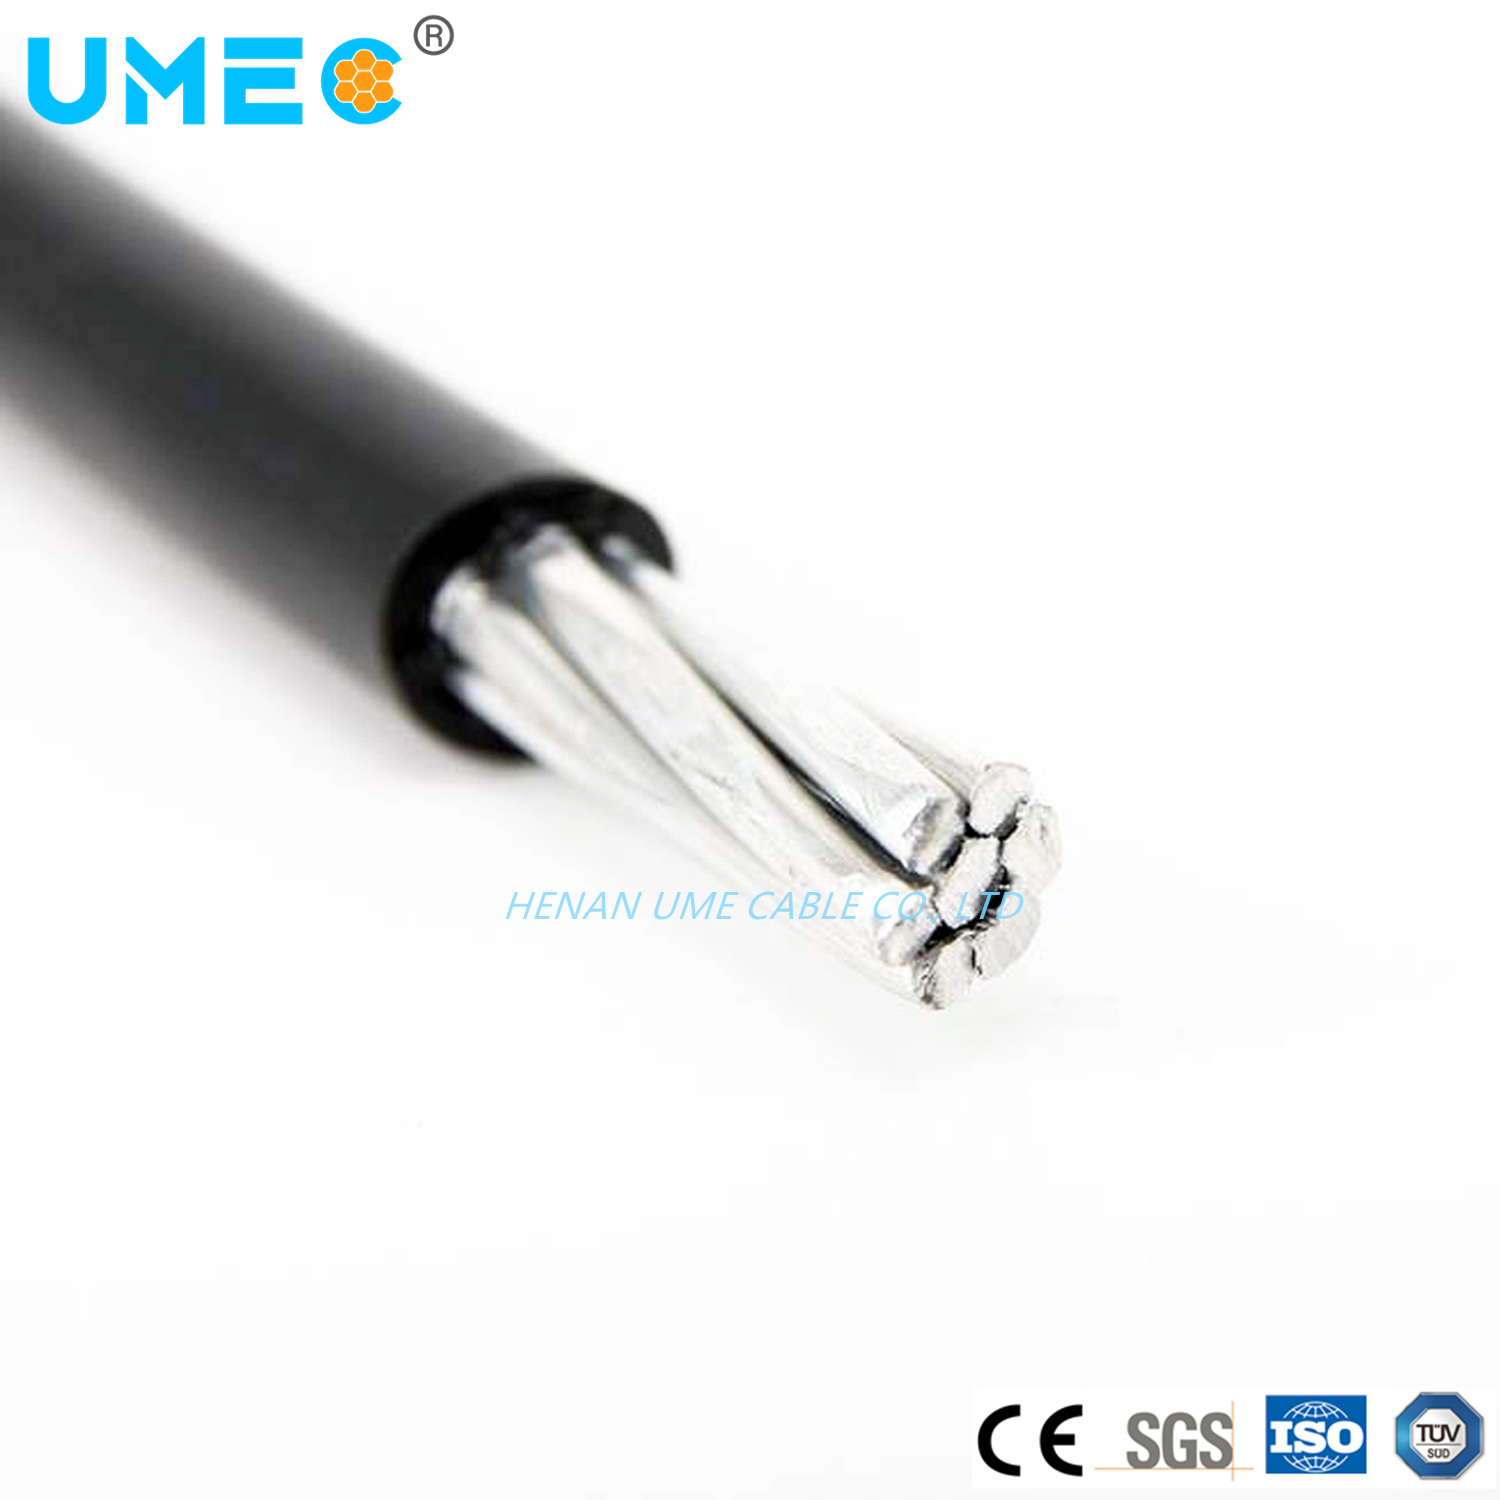 0.6kv XLPE Insulation Specical Cable Xhhw-2 Cable